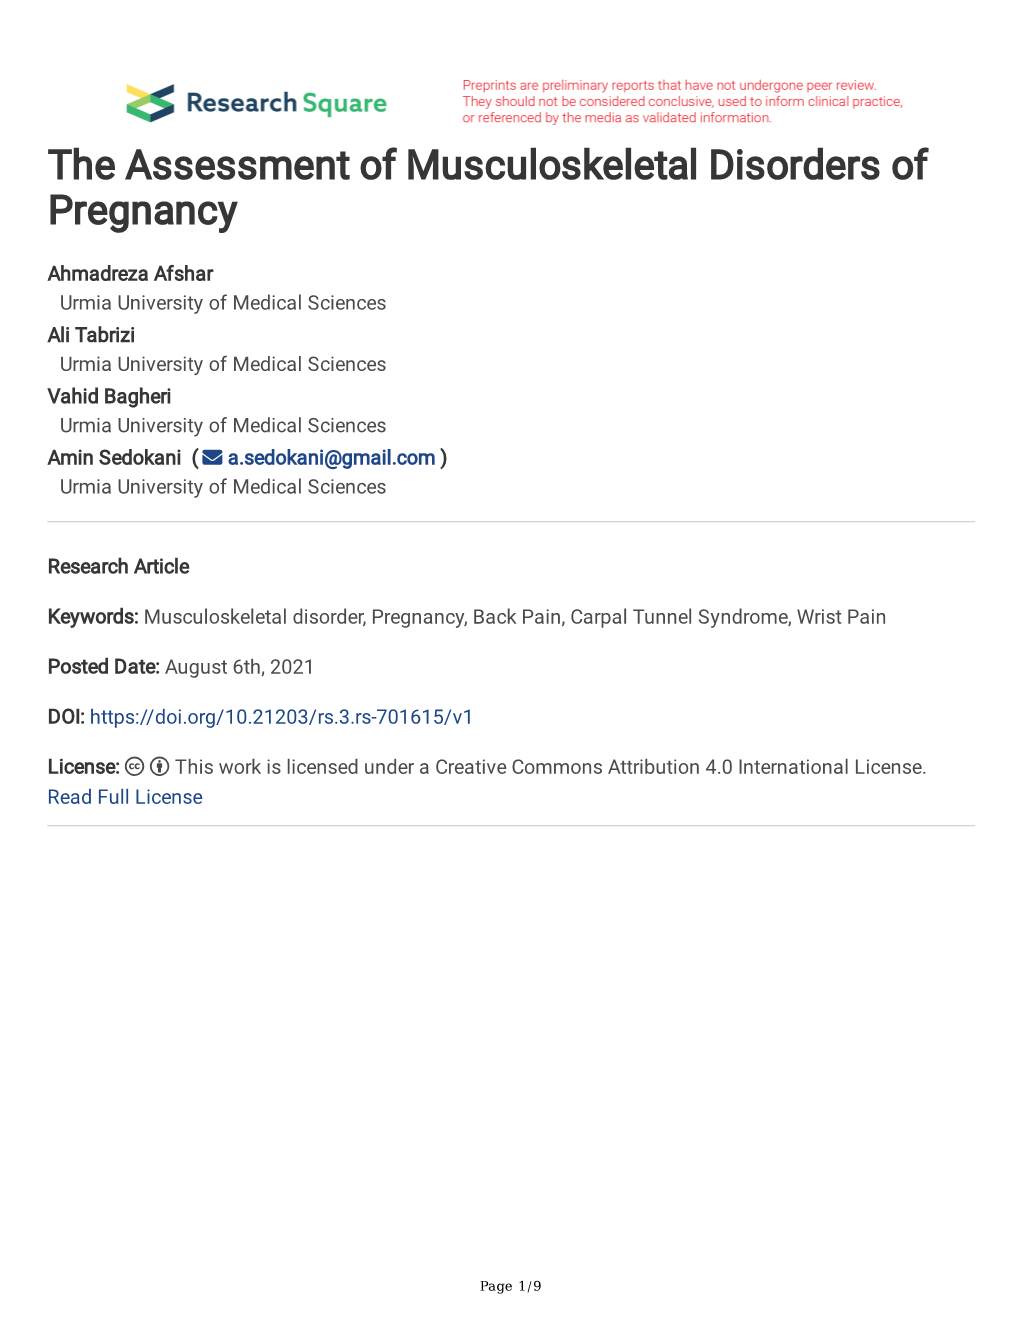 The Assessment of Musculoskeletal Disorders of Pregnancy